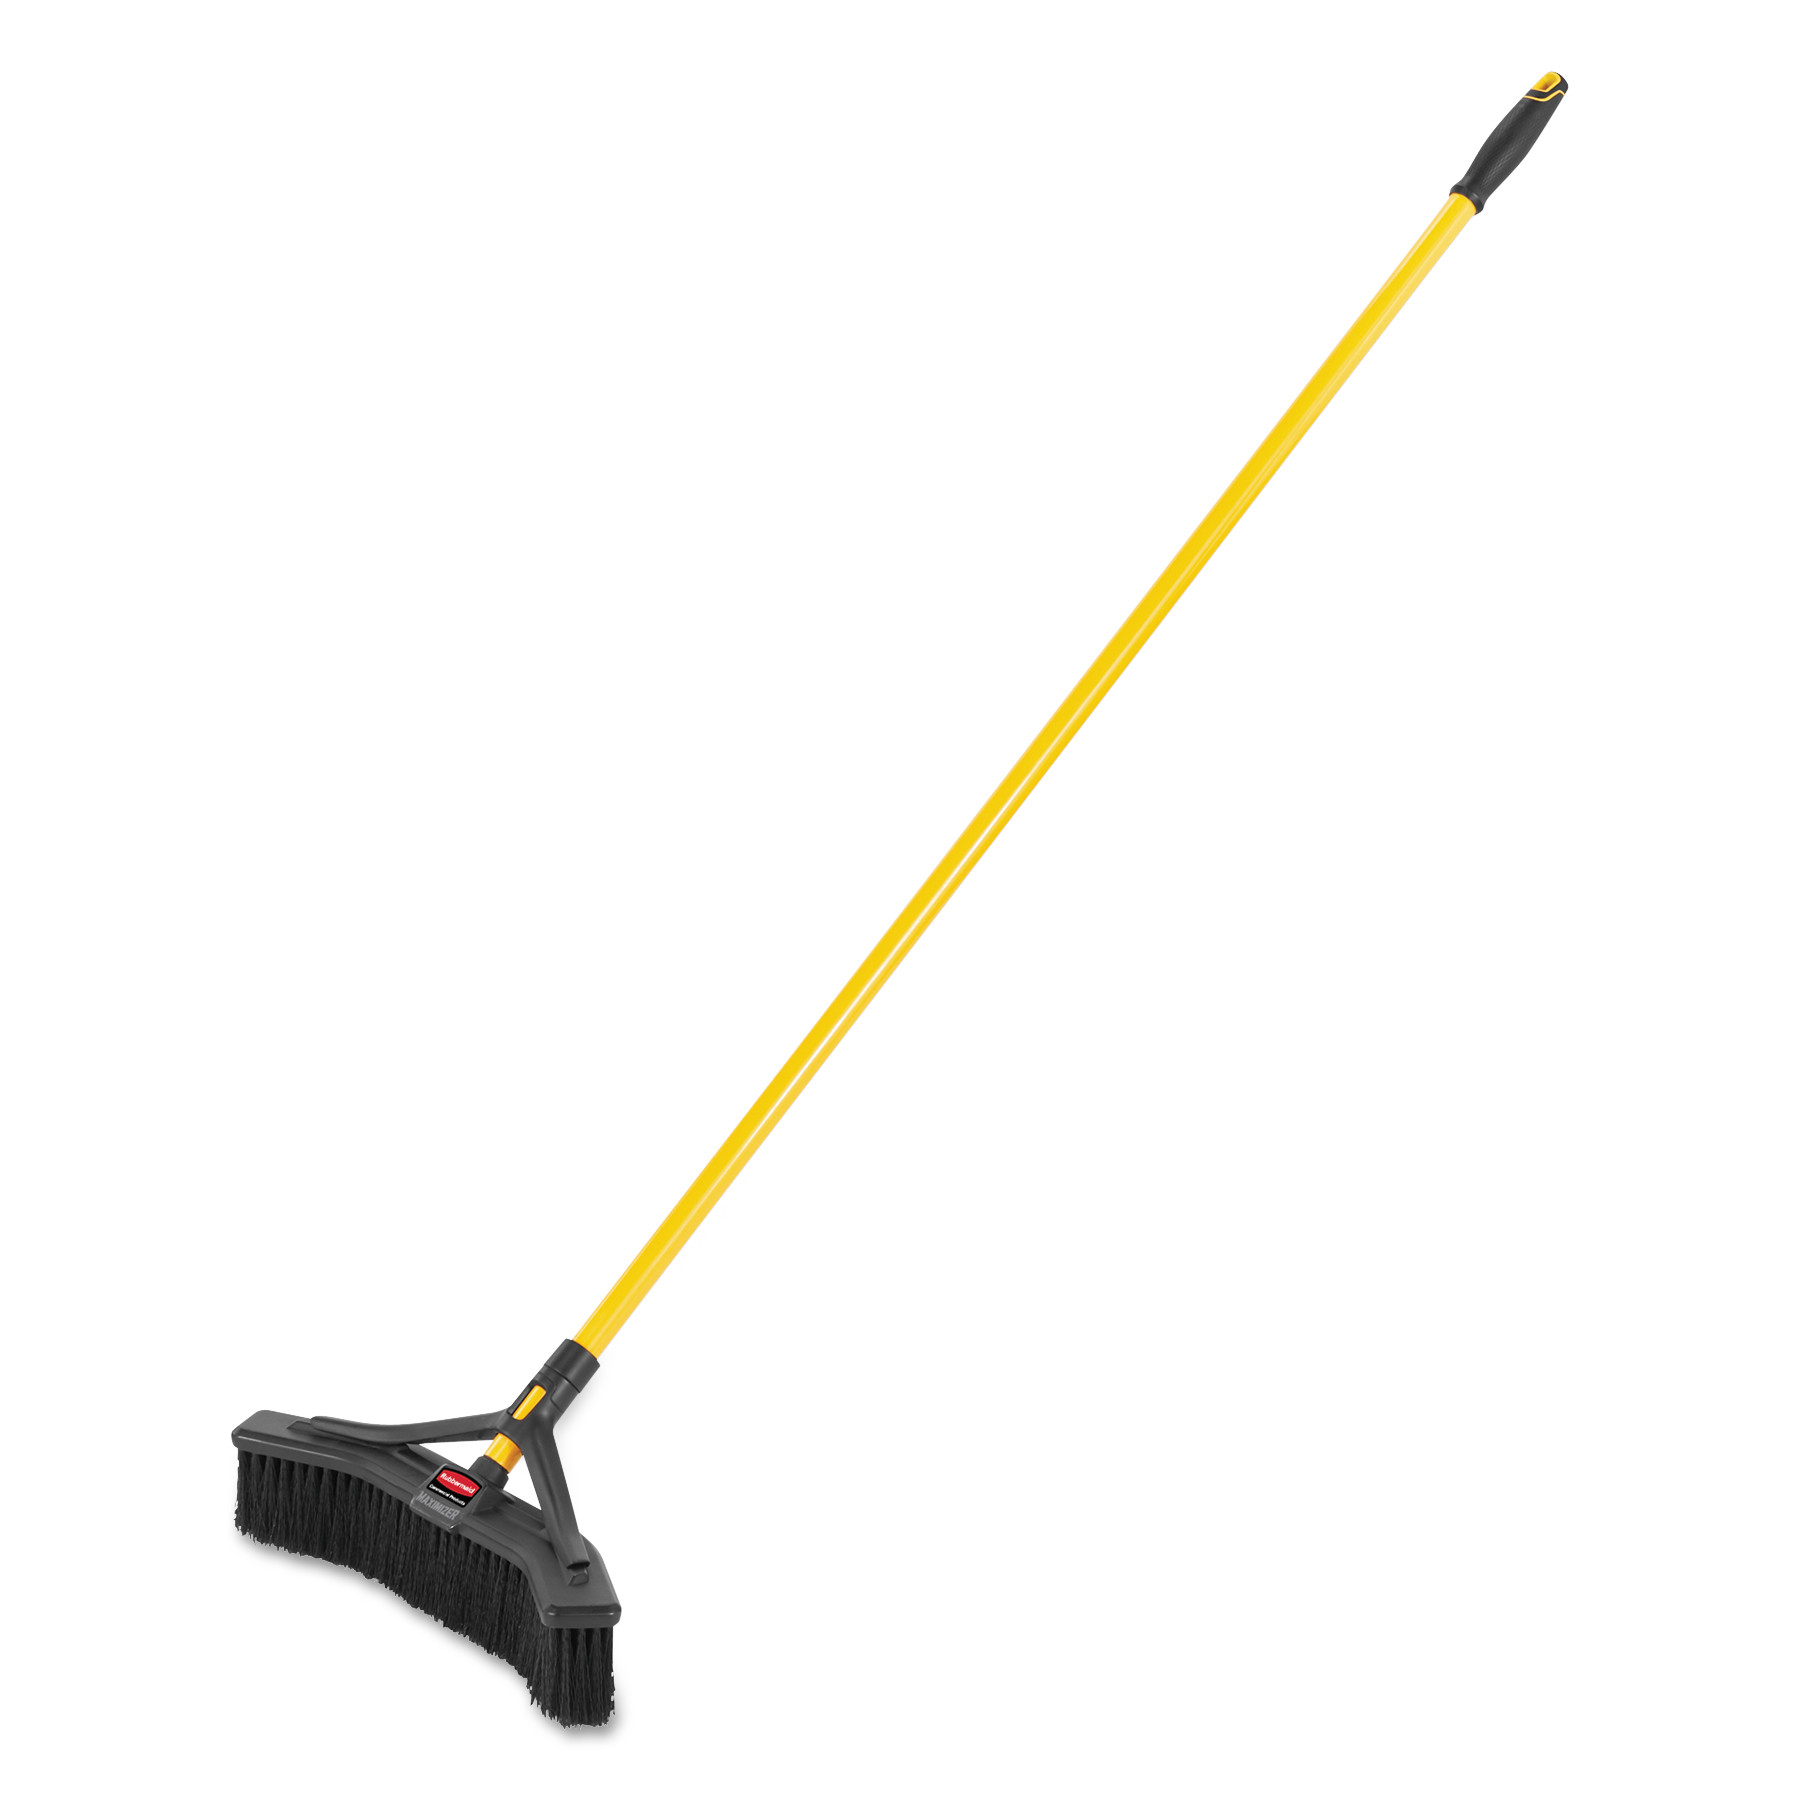  Rubbermaid Commercial 2018727 Maximizer Push-to-Center Broom, 18, Polypropylene Bristles, Yellow/Black (RCP2018727) 